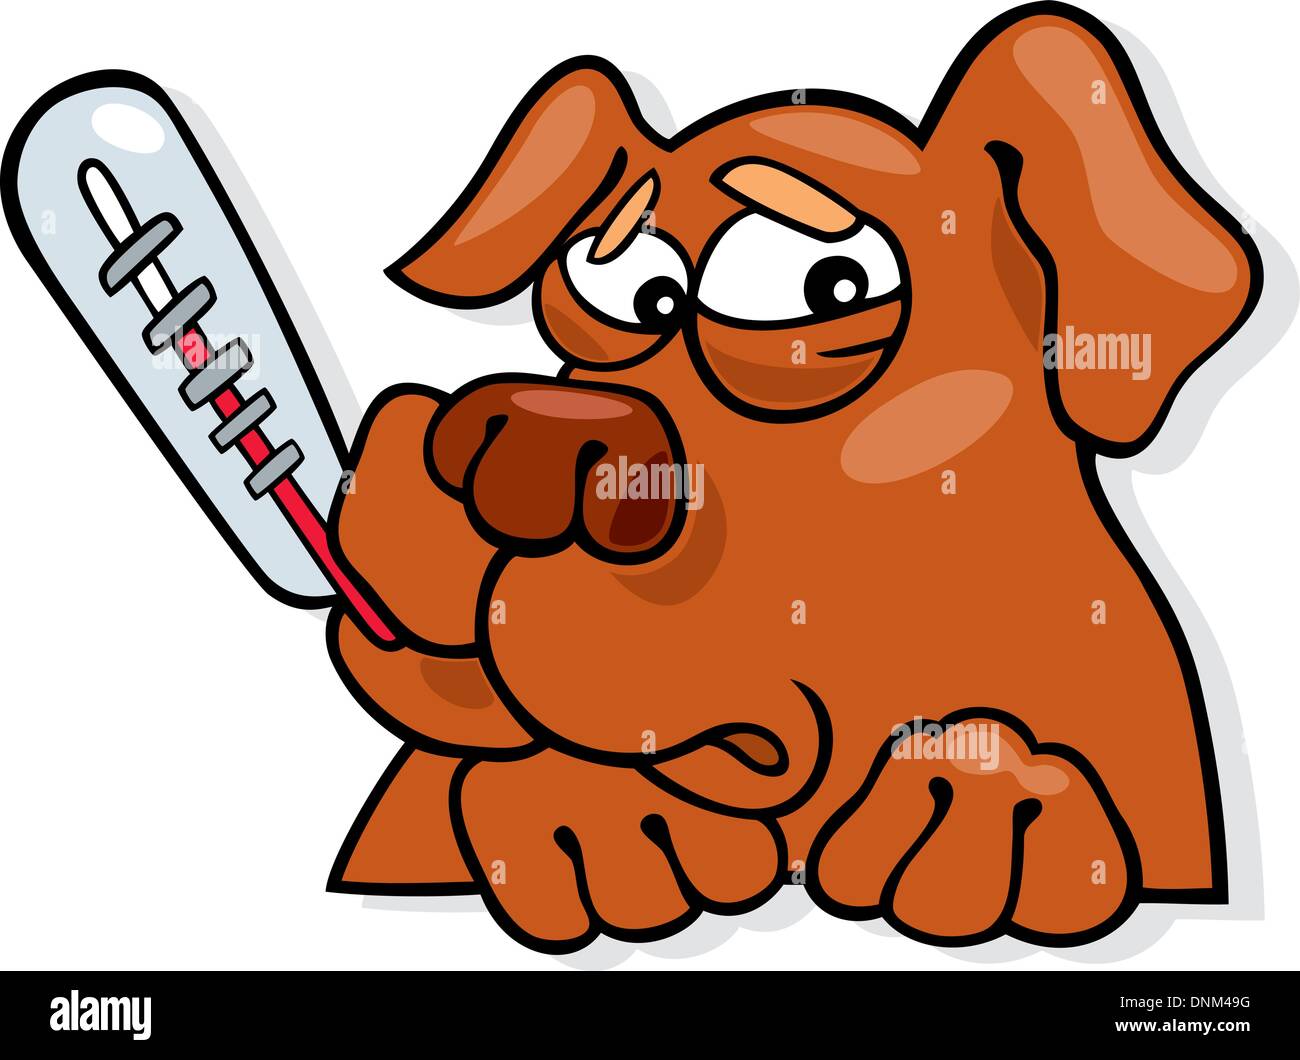 Cartoon illustration of ill dog with thermometer Stock Vector Image ...